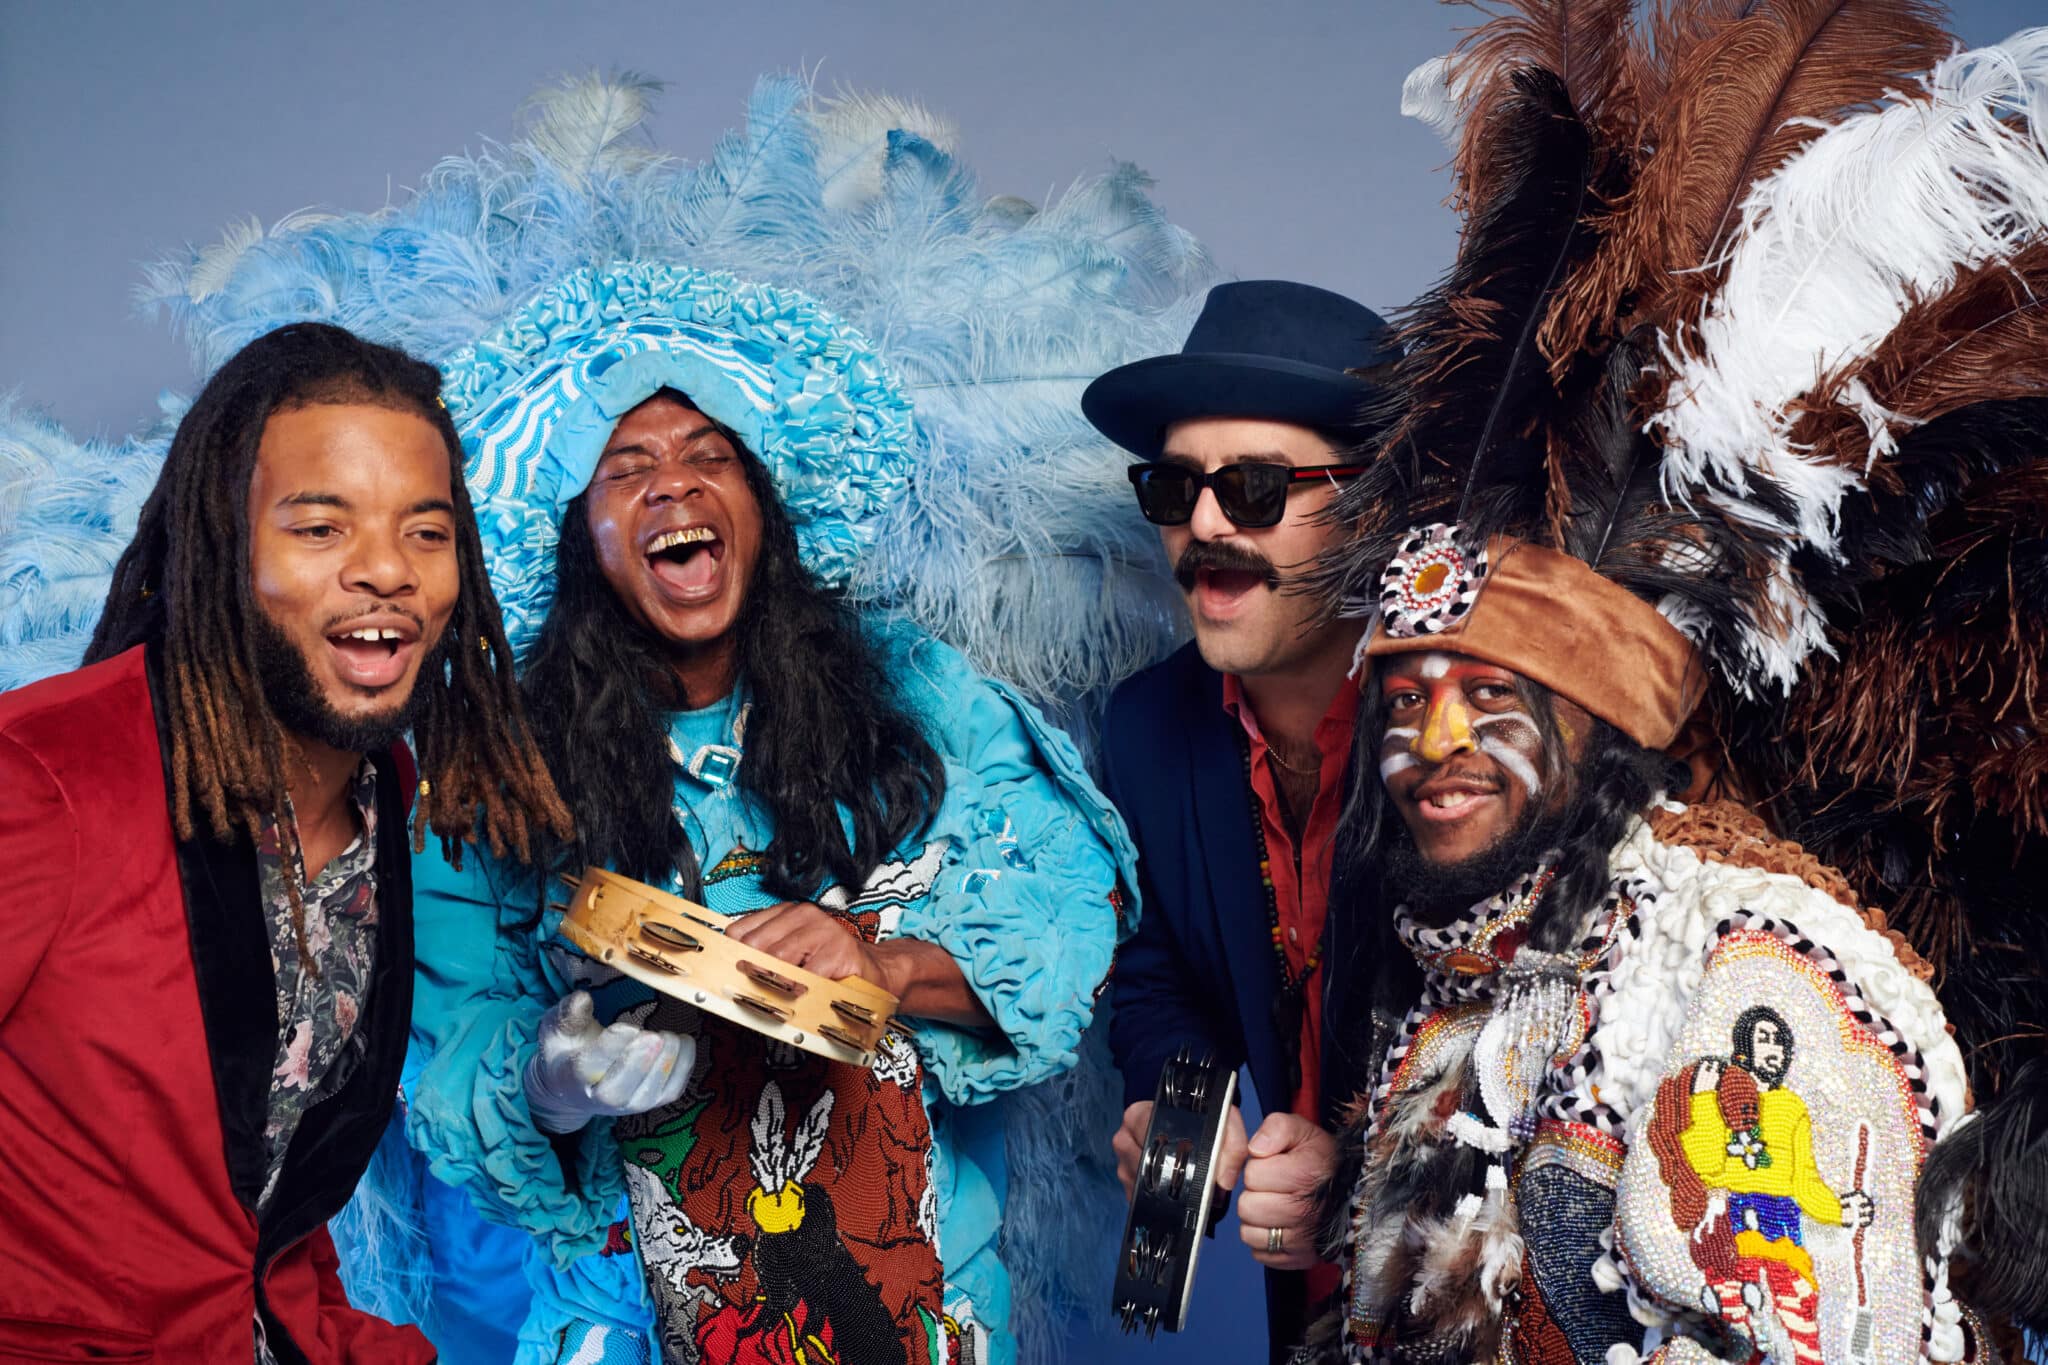 Cha Wa, New Orleans brass band-meets-Mardi Gras Indian outfit Cha Wa radiates the energy of the city’s street culture.